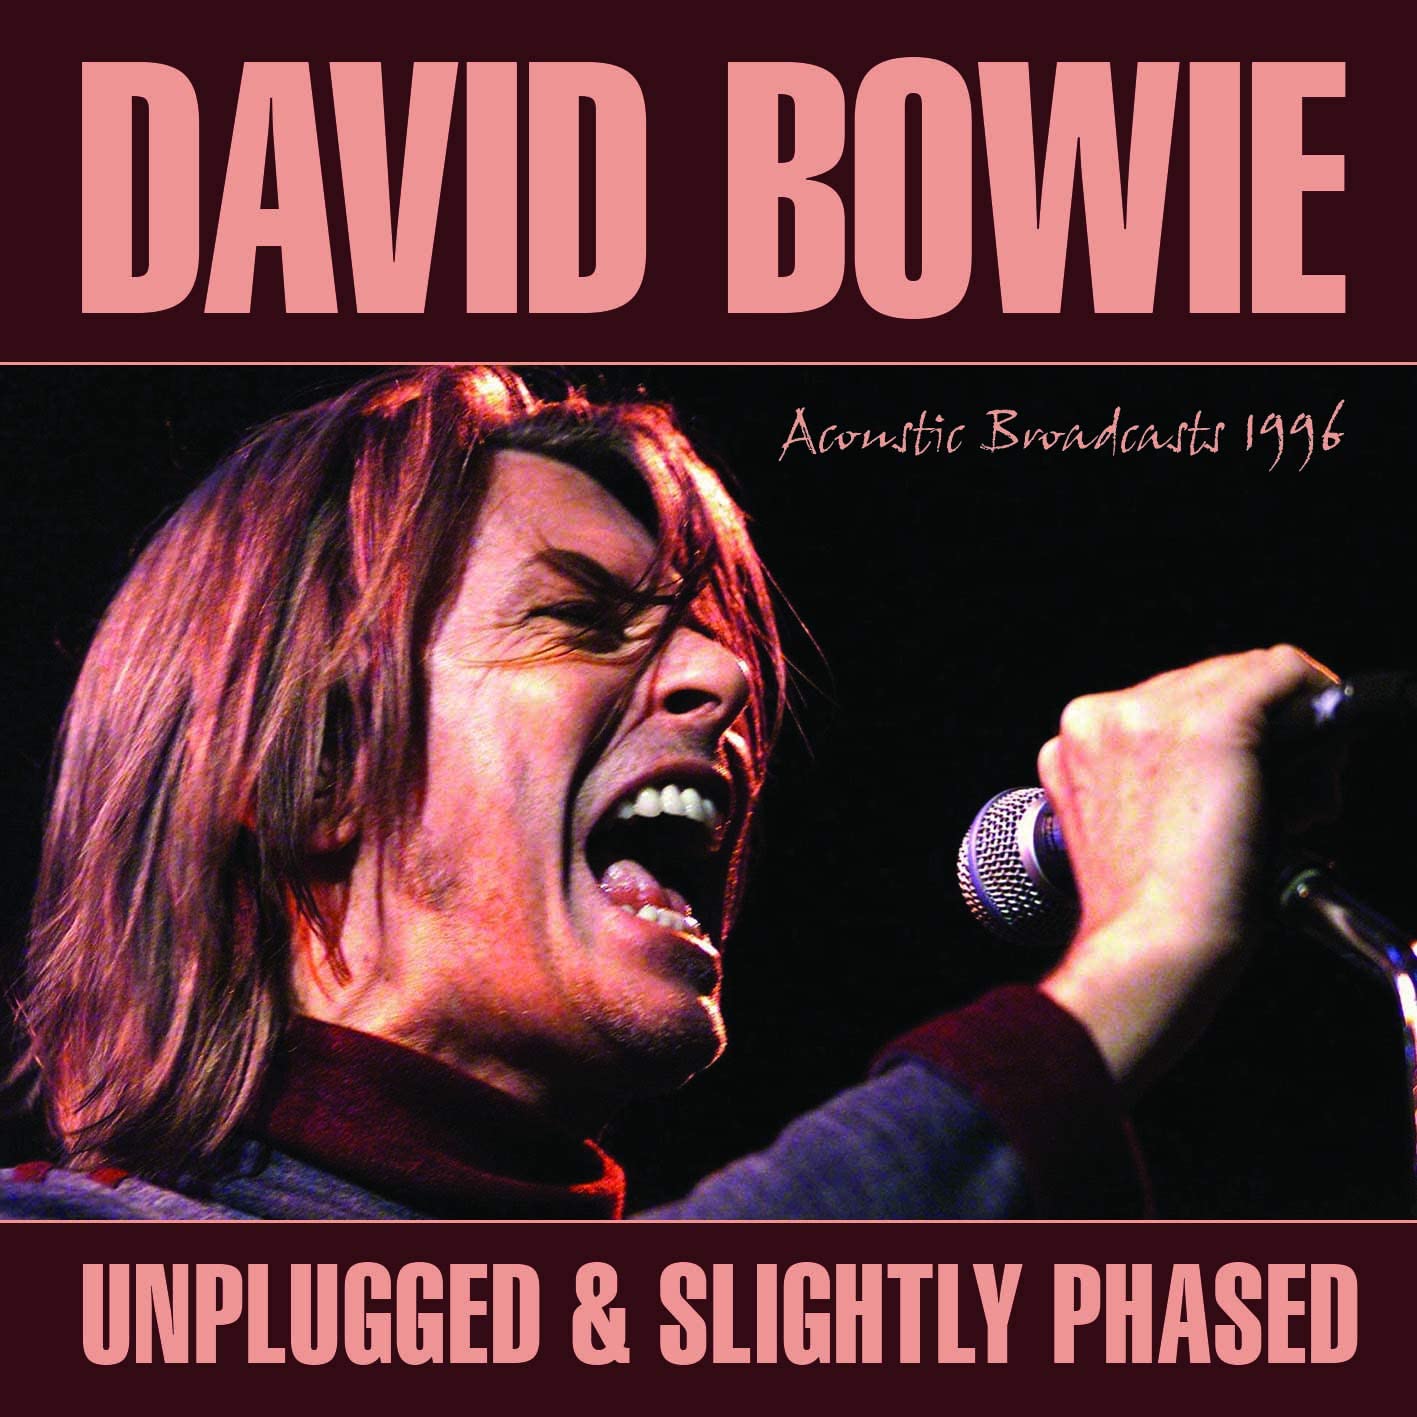 BOWIE DAVID - UNPLUGGED & SLIGHTLY PHASED - ACOUSTIC BROADCAST 1996 (LTD CLEAR VINYL)